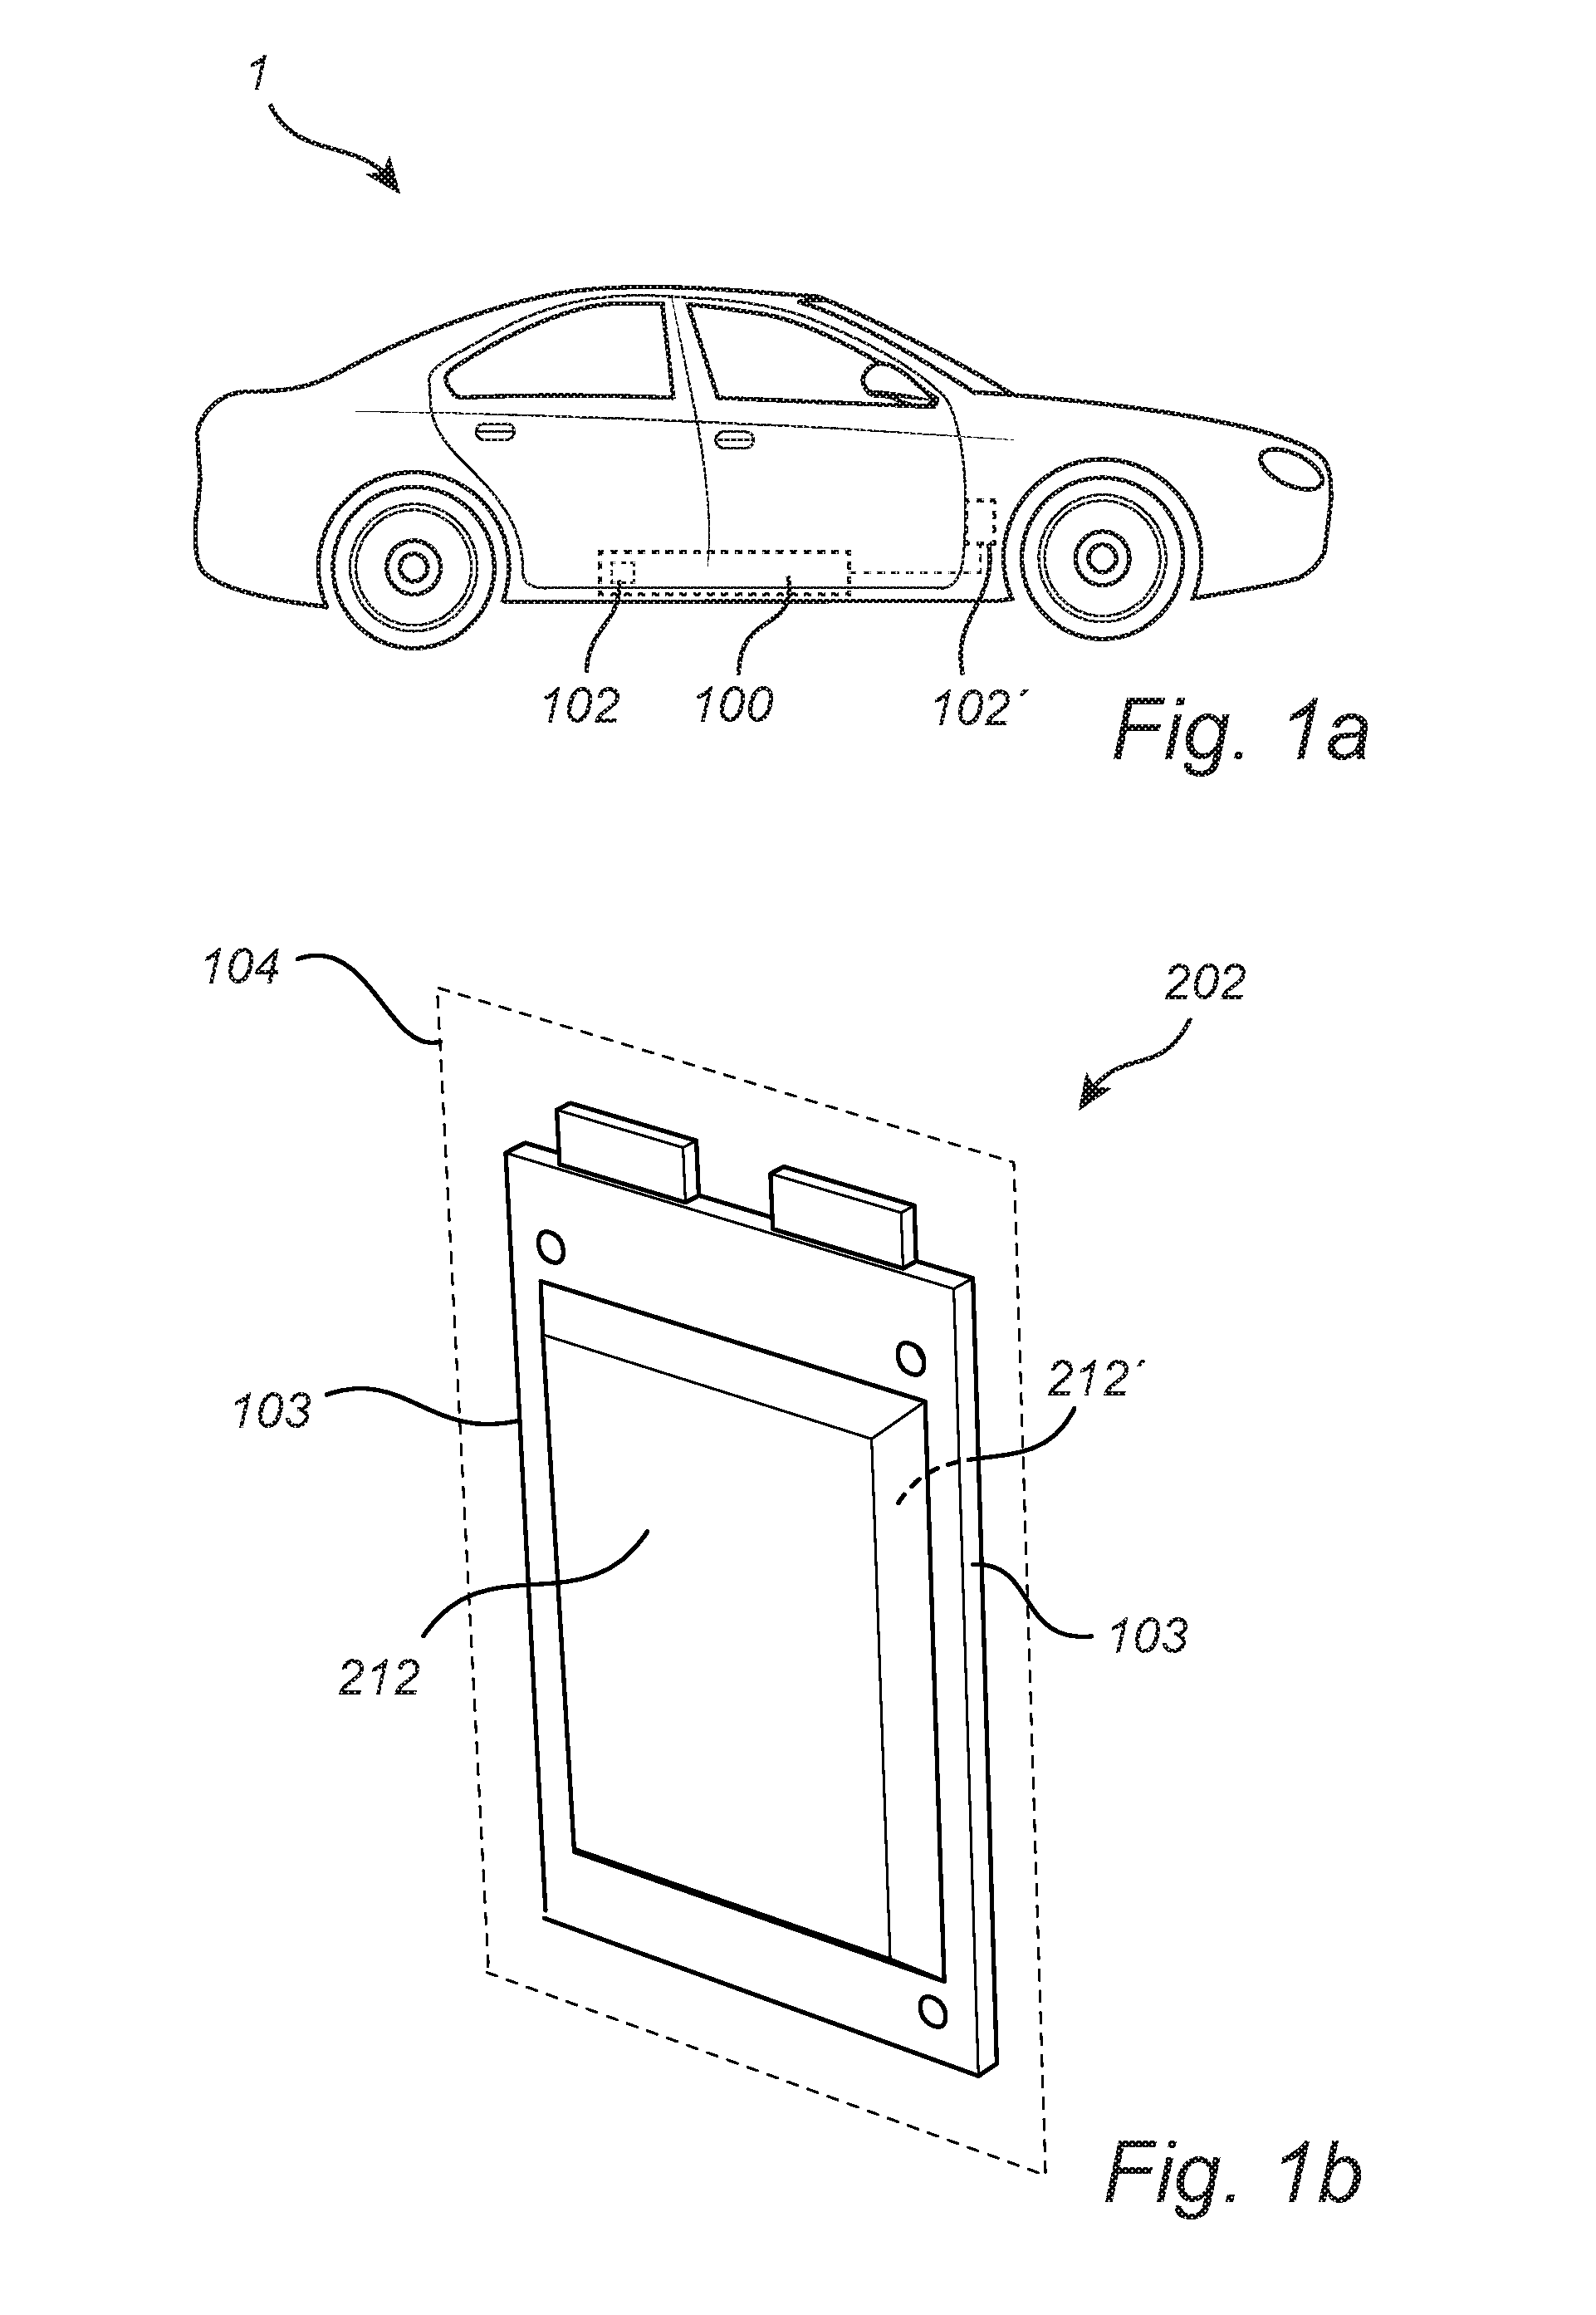 Damage detection and warning system of a battery pack